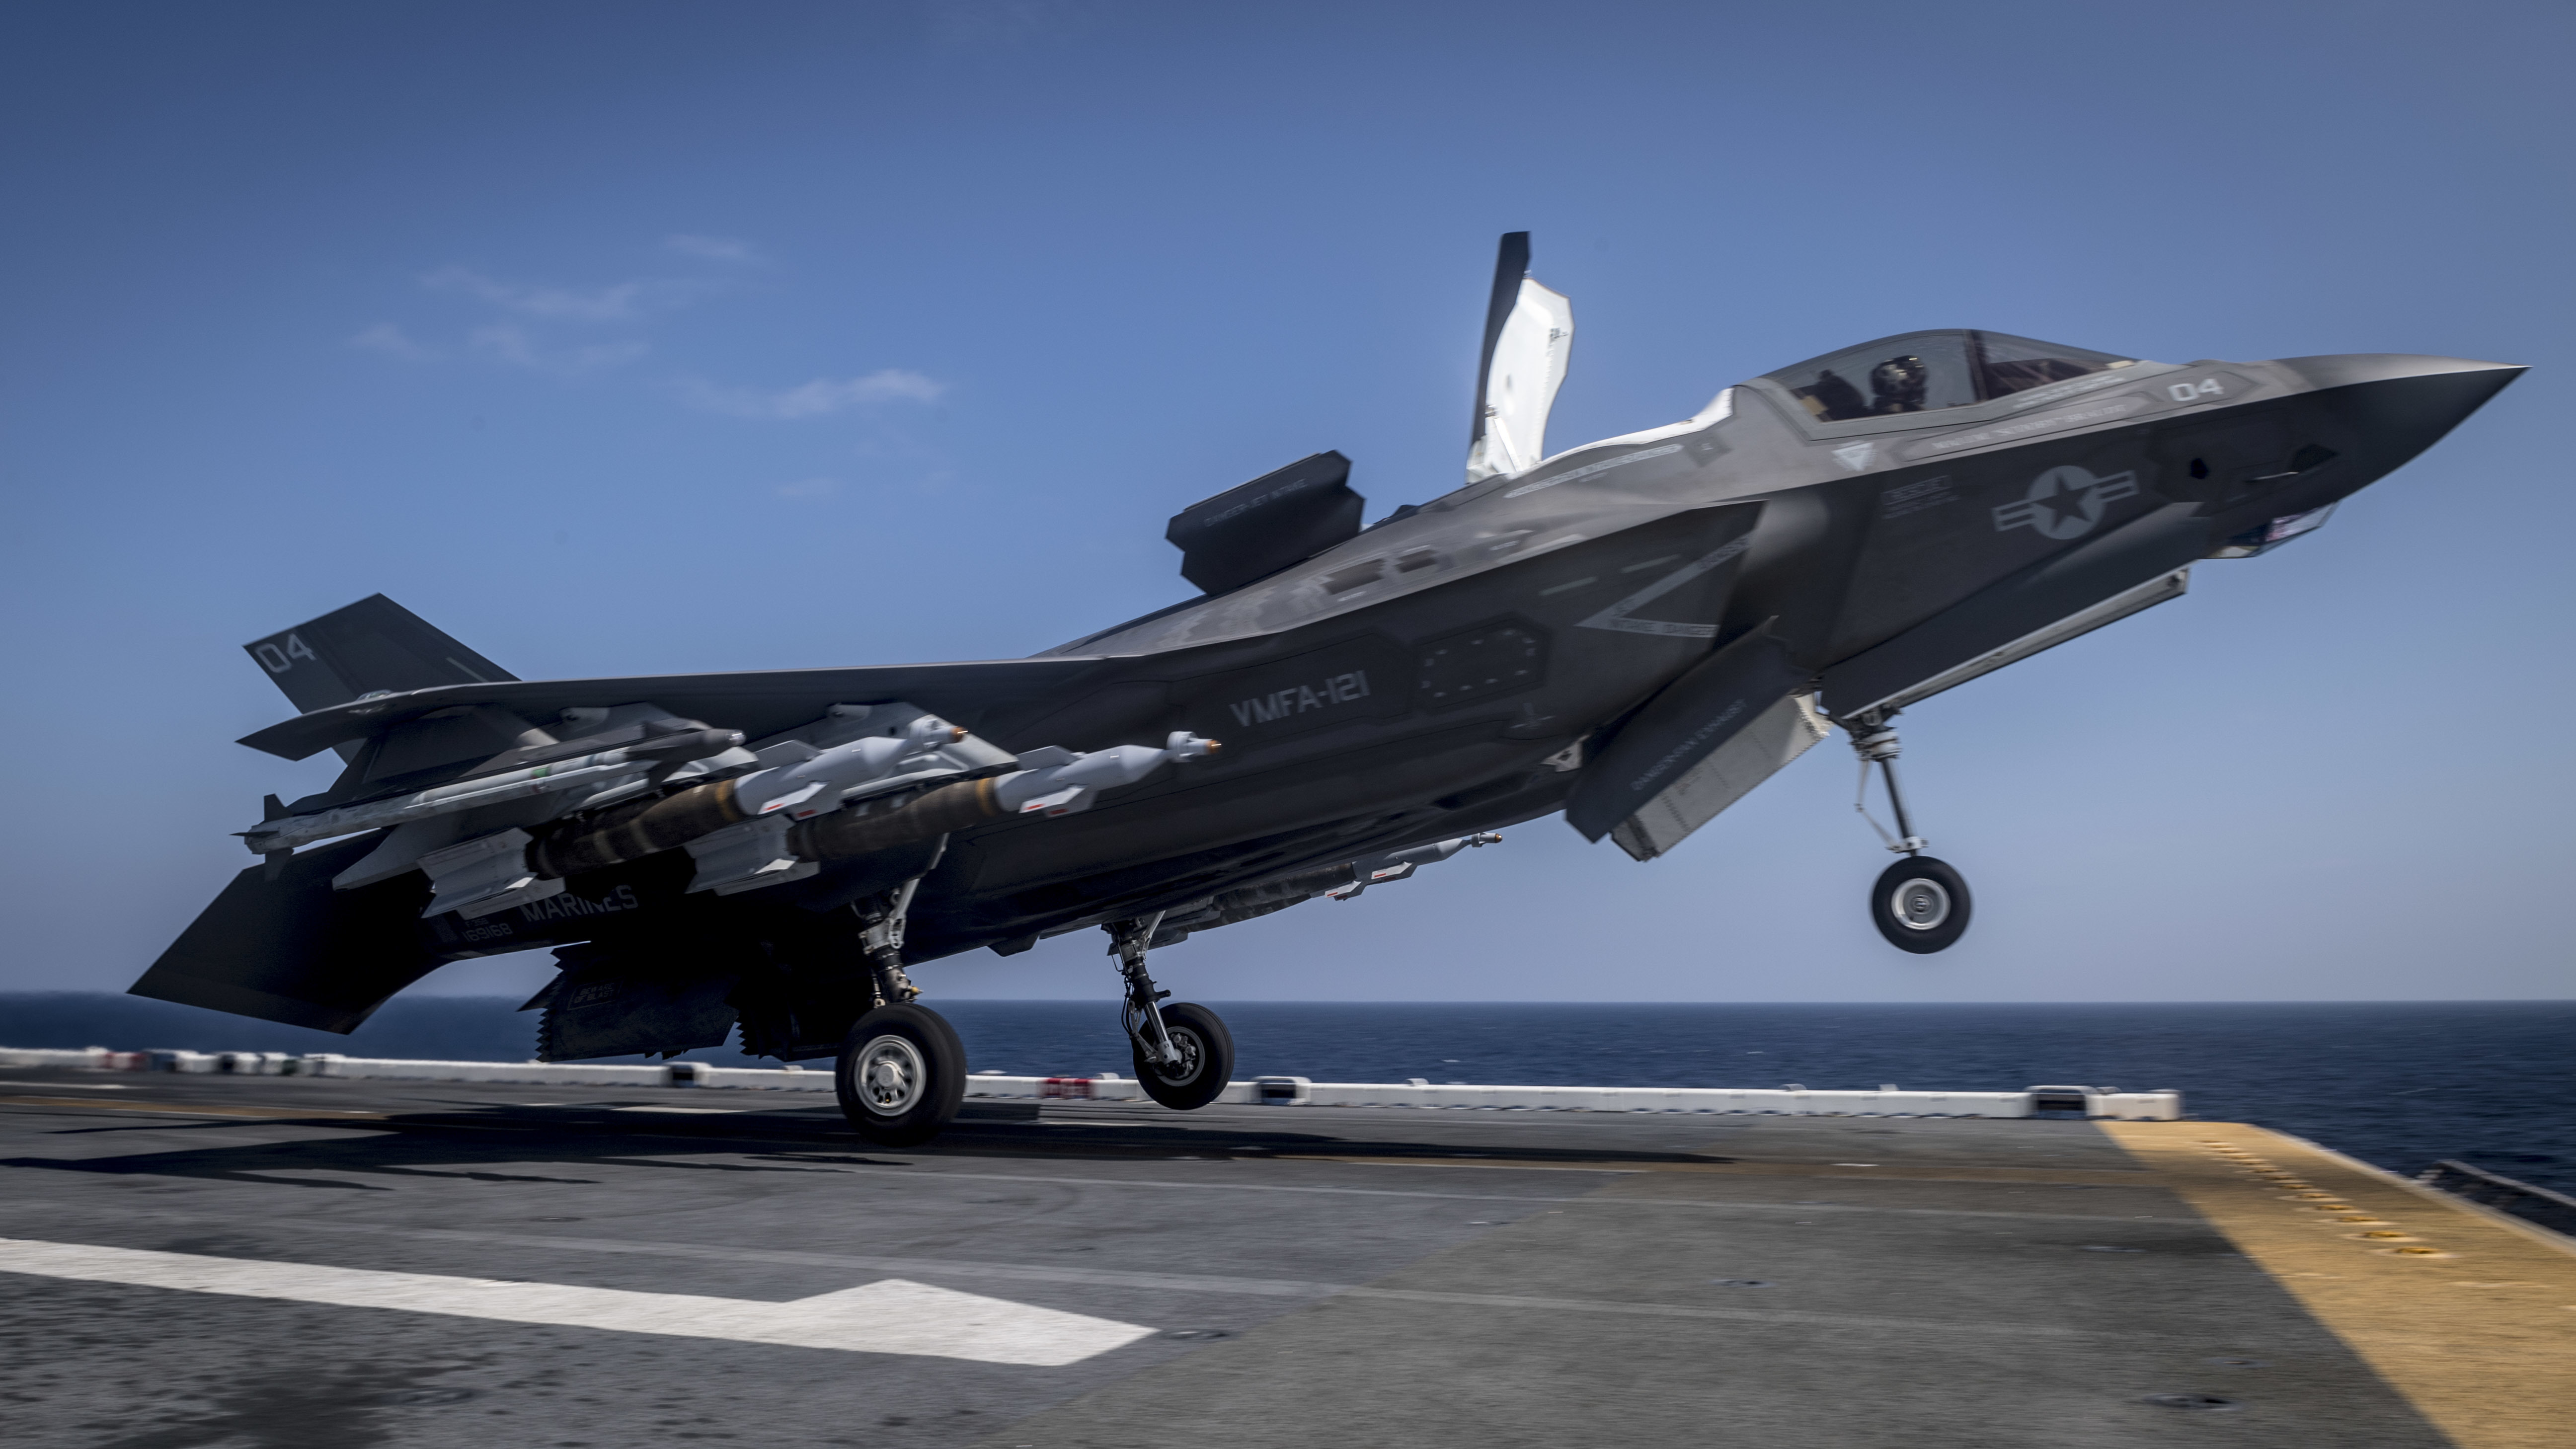 An F-35B Lightning II aircraft attached to the F-35B detachment of the &quo...